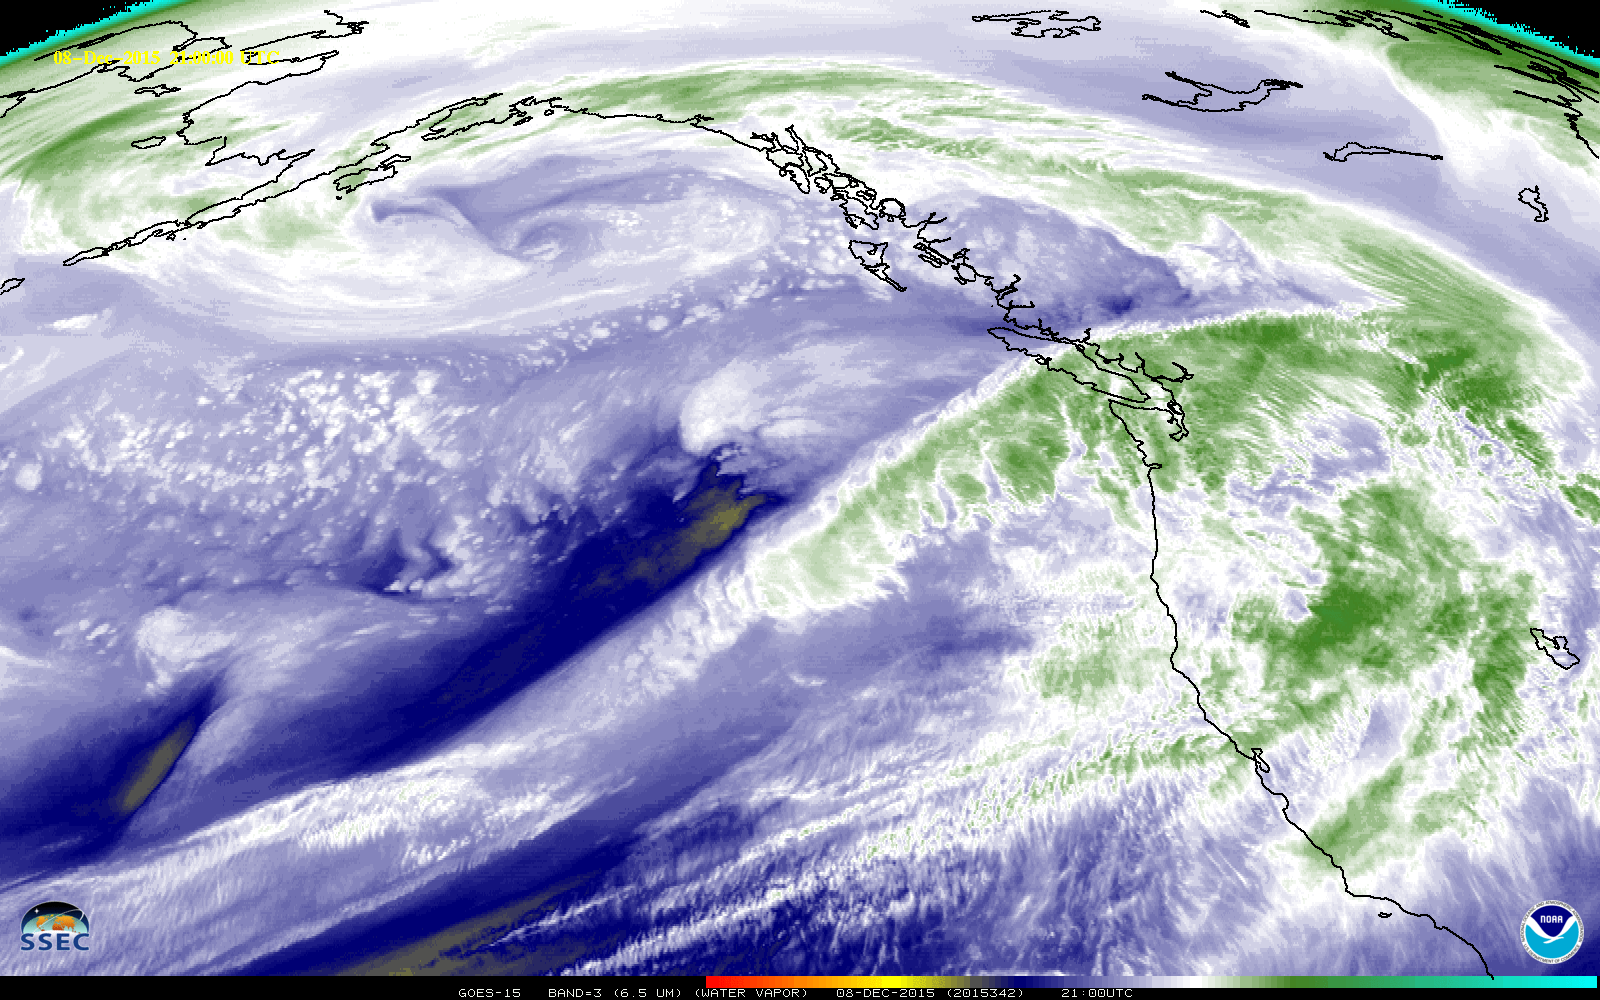 GOES-15 Band 3 Water Vapor (6.5 µm) imagery for 6-8 December 2015 [click to play animation]